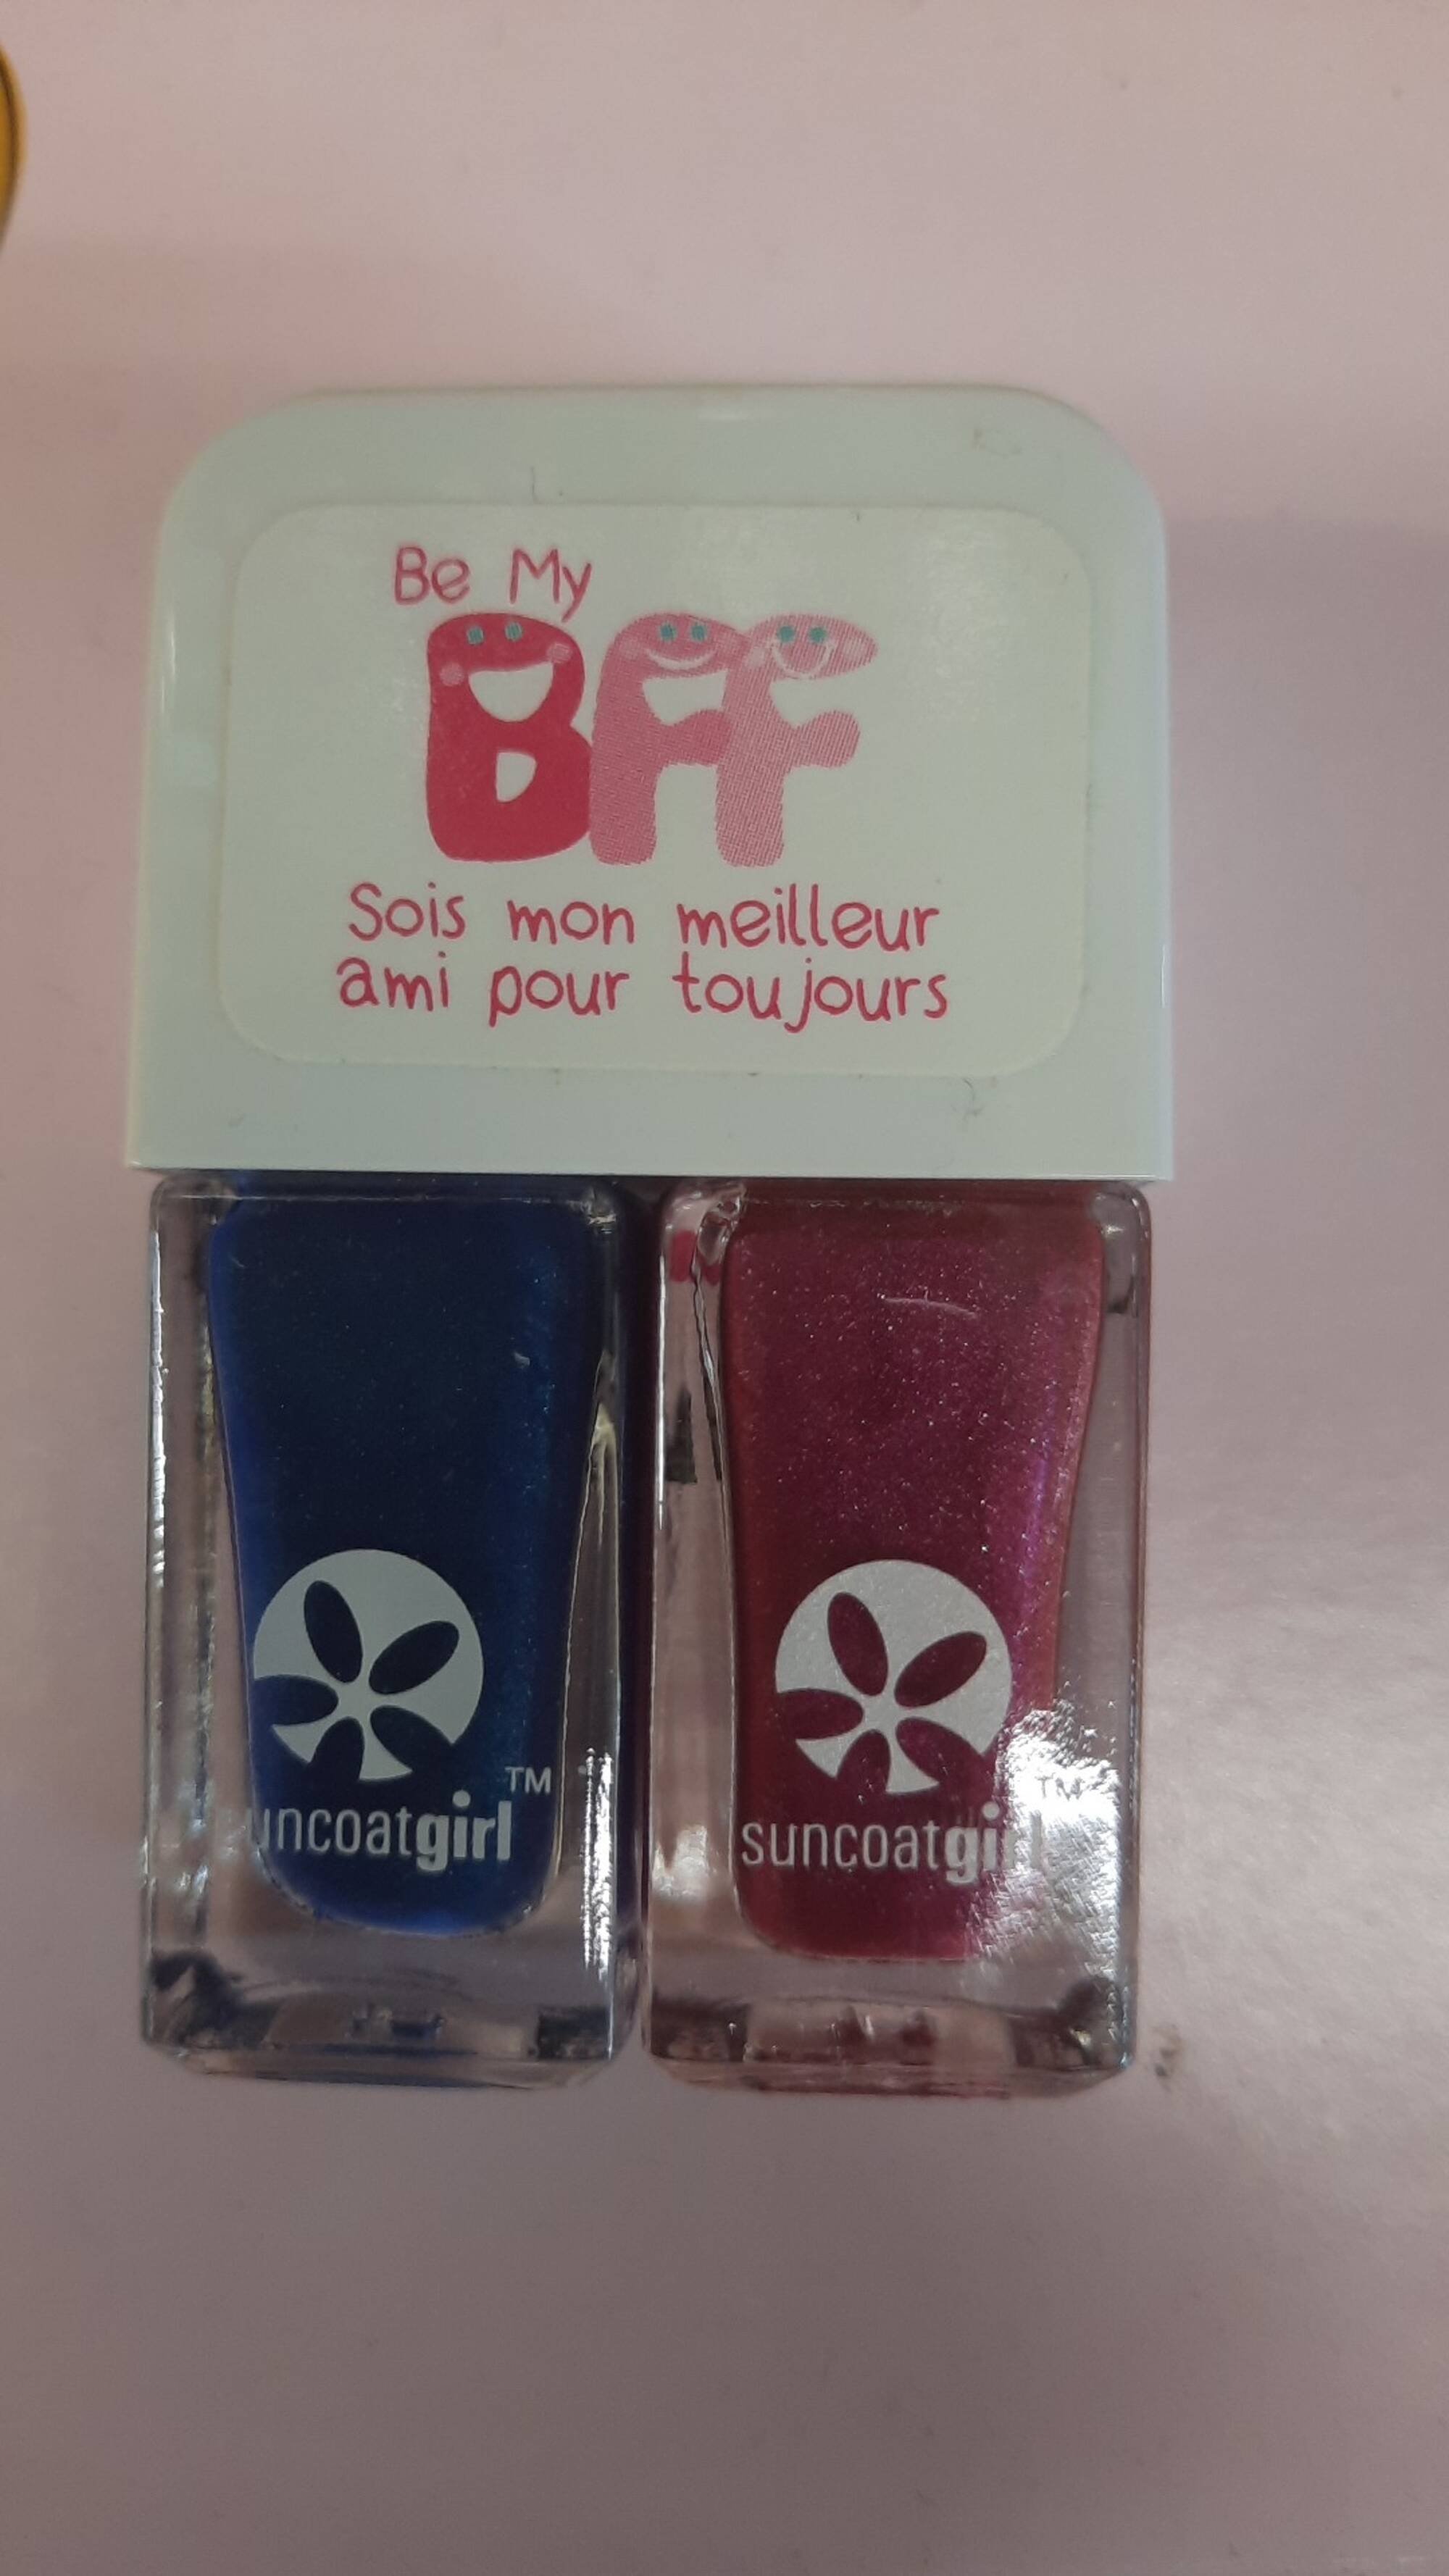 SUNCOAT GIRL - Be my BFF - Vernis à ongles